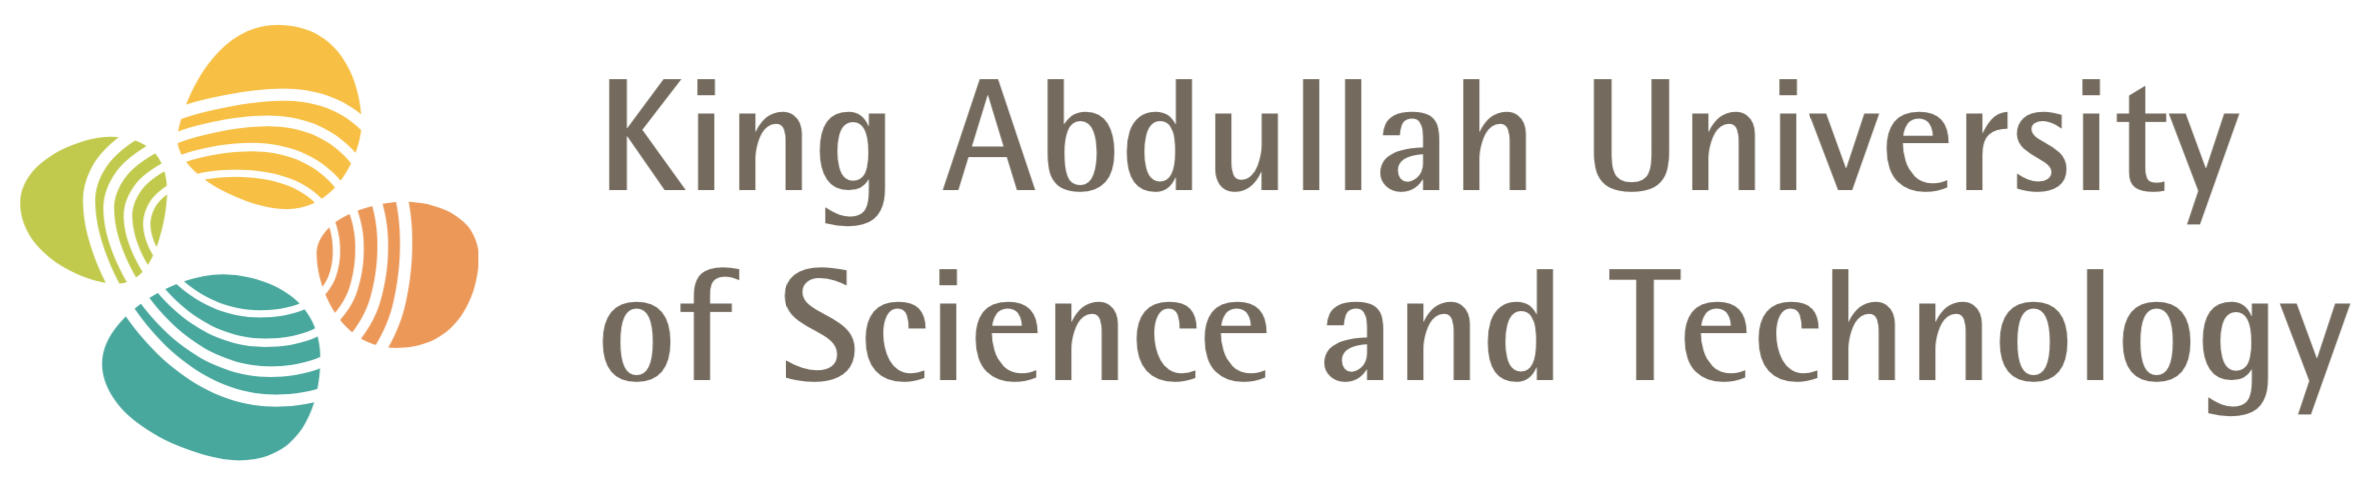 King Abdullah University of Science and Technology Logo